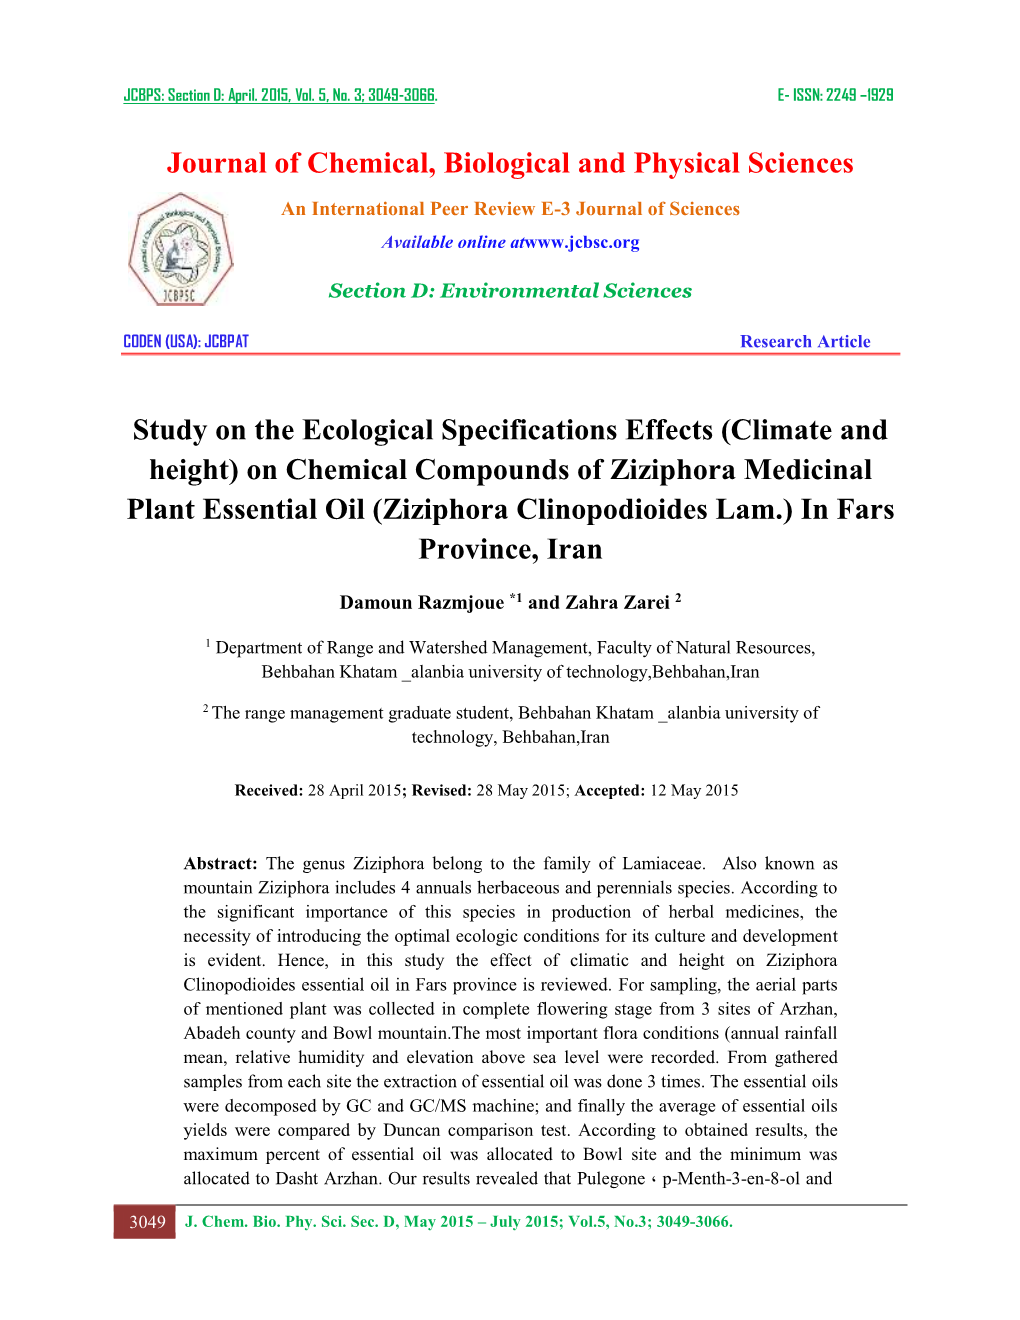 Climate and Height) on Chemical Compounds of Ziziphora Medicinal Plant Essential Oil (Ziziphora Clinopodioides Lam.) in Fars Province, Iran